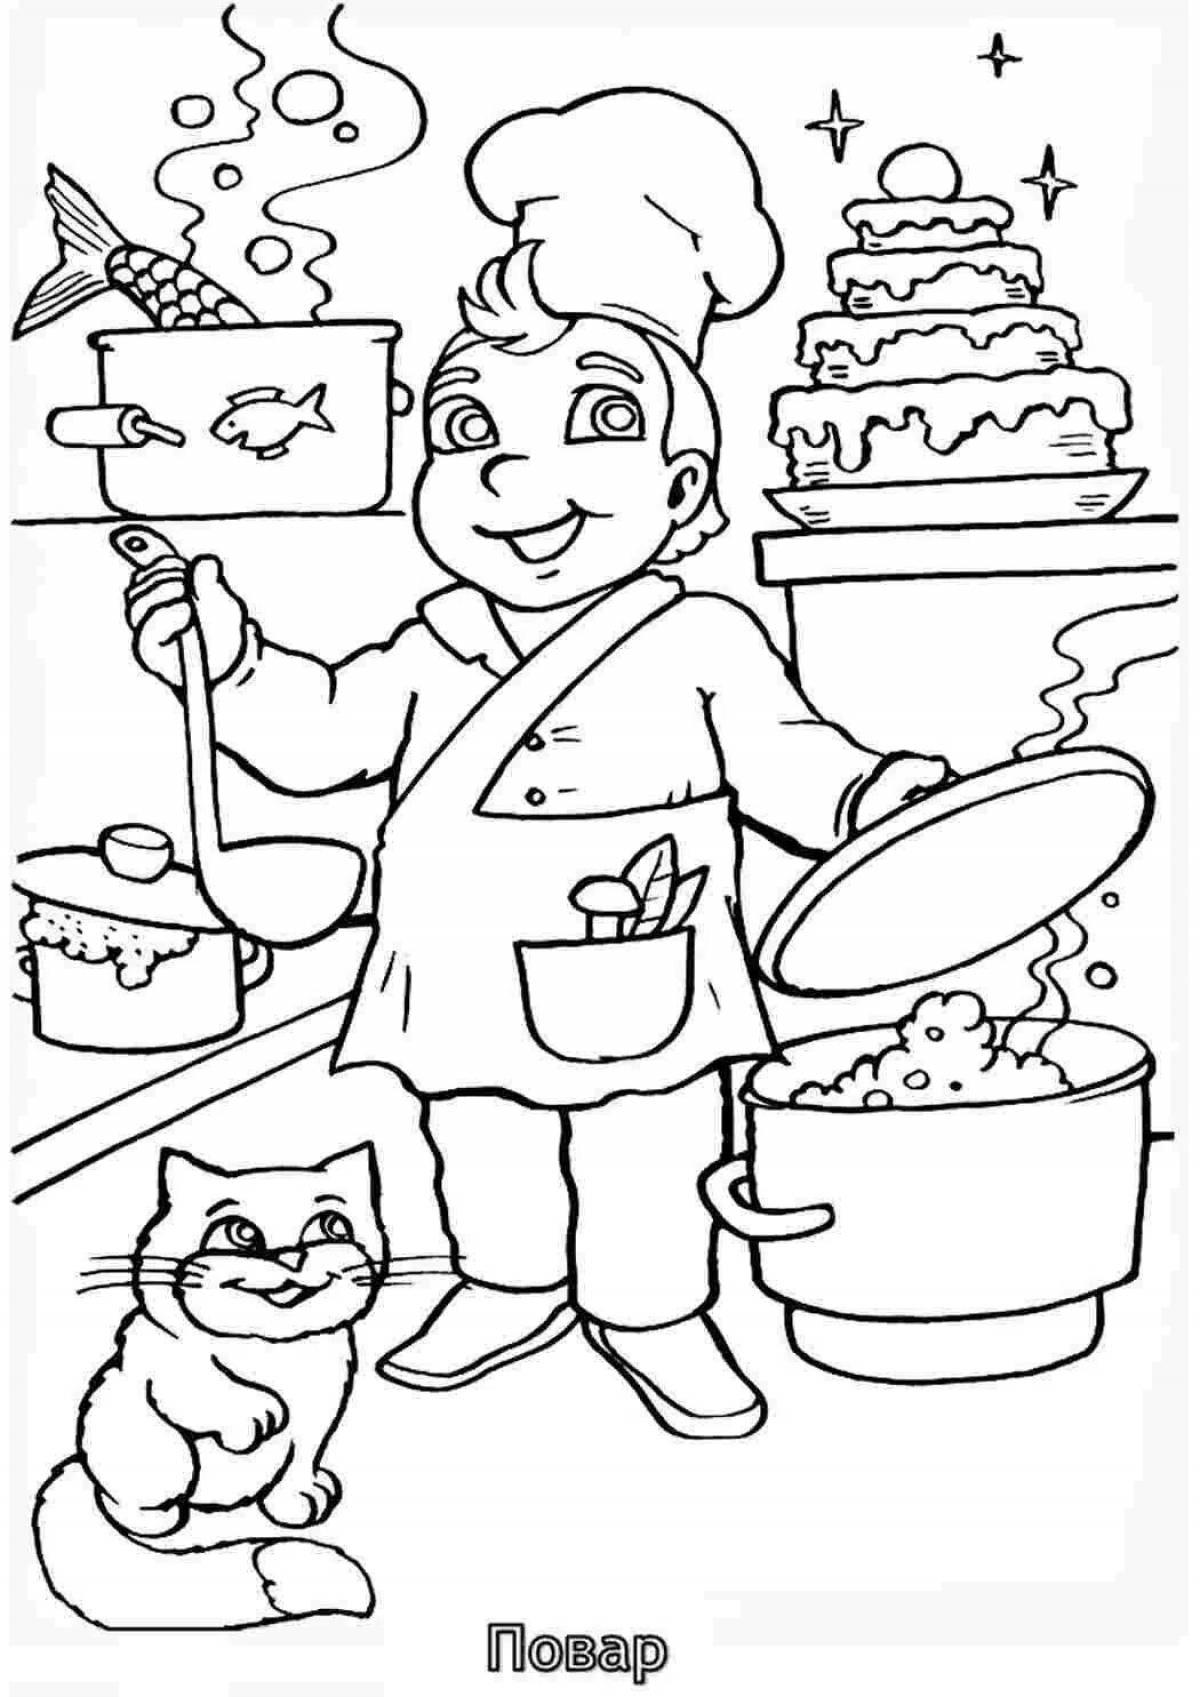 A wonderful coloring world of professions for children